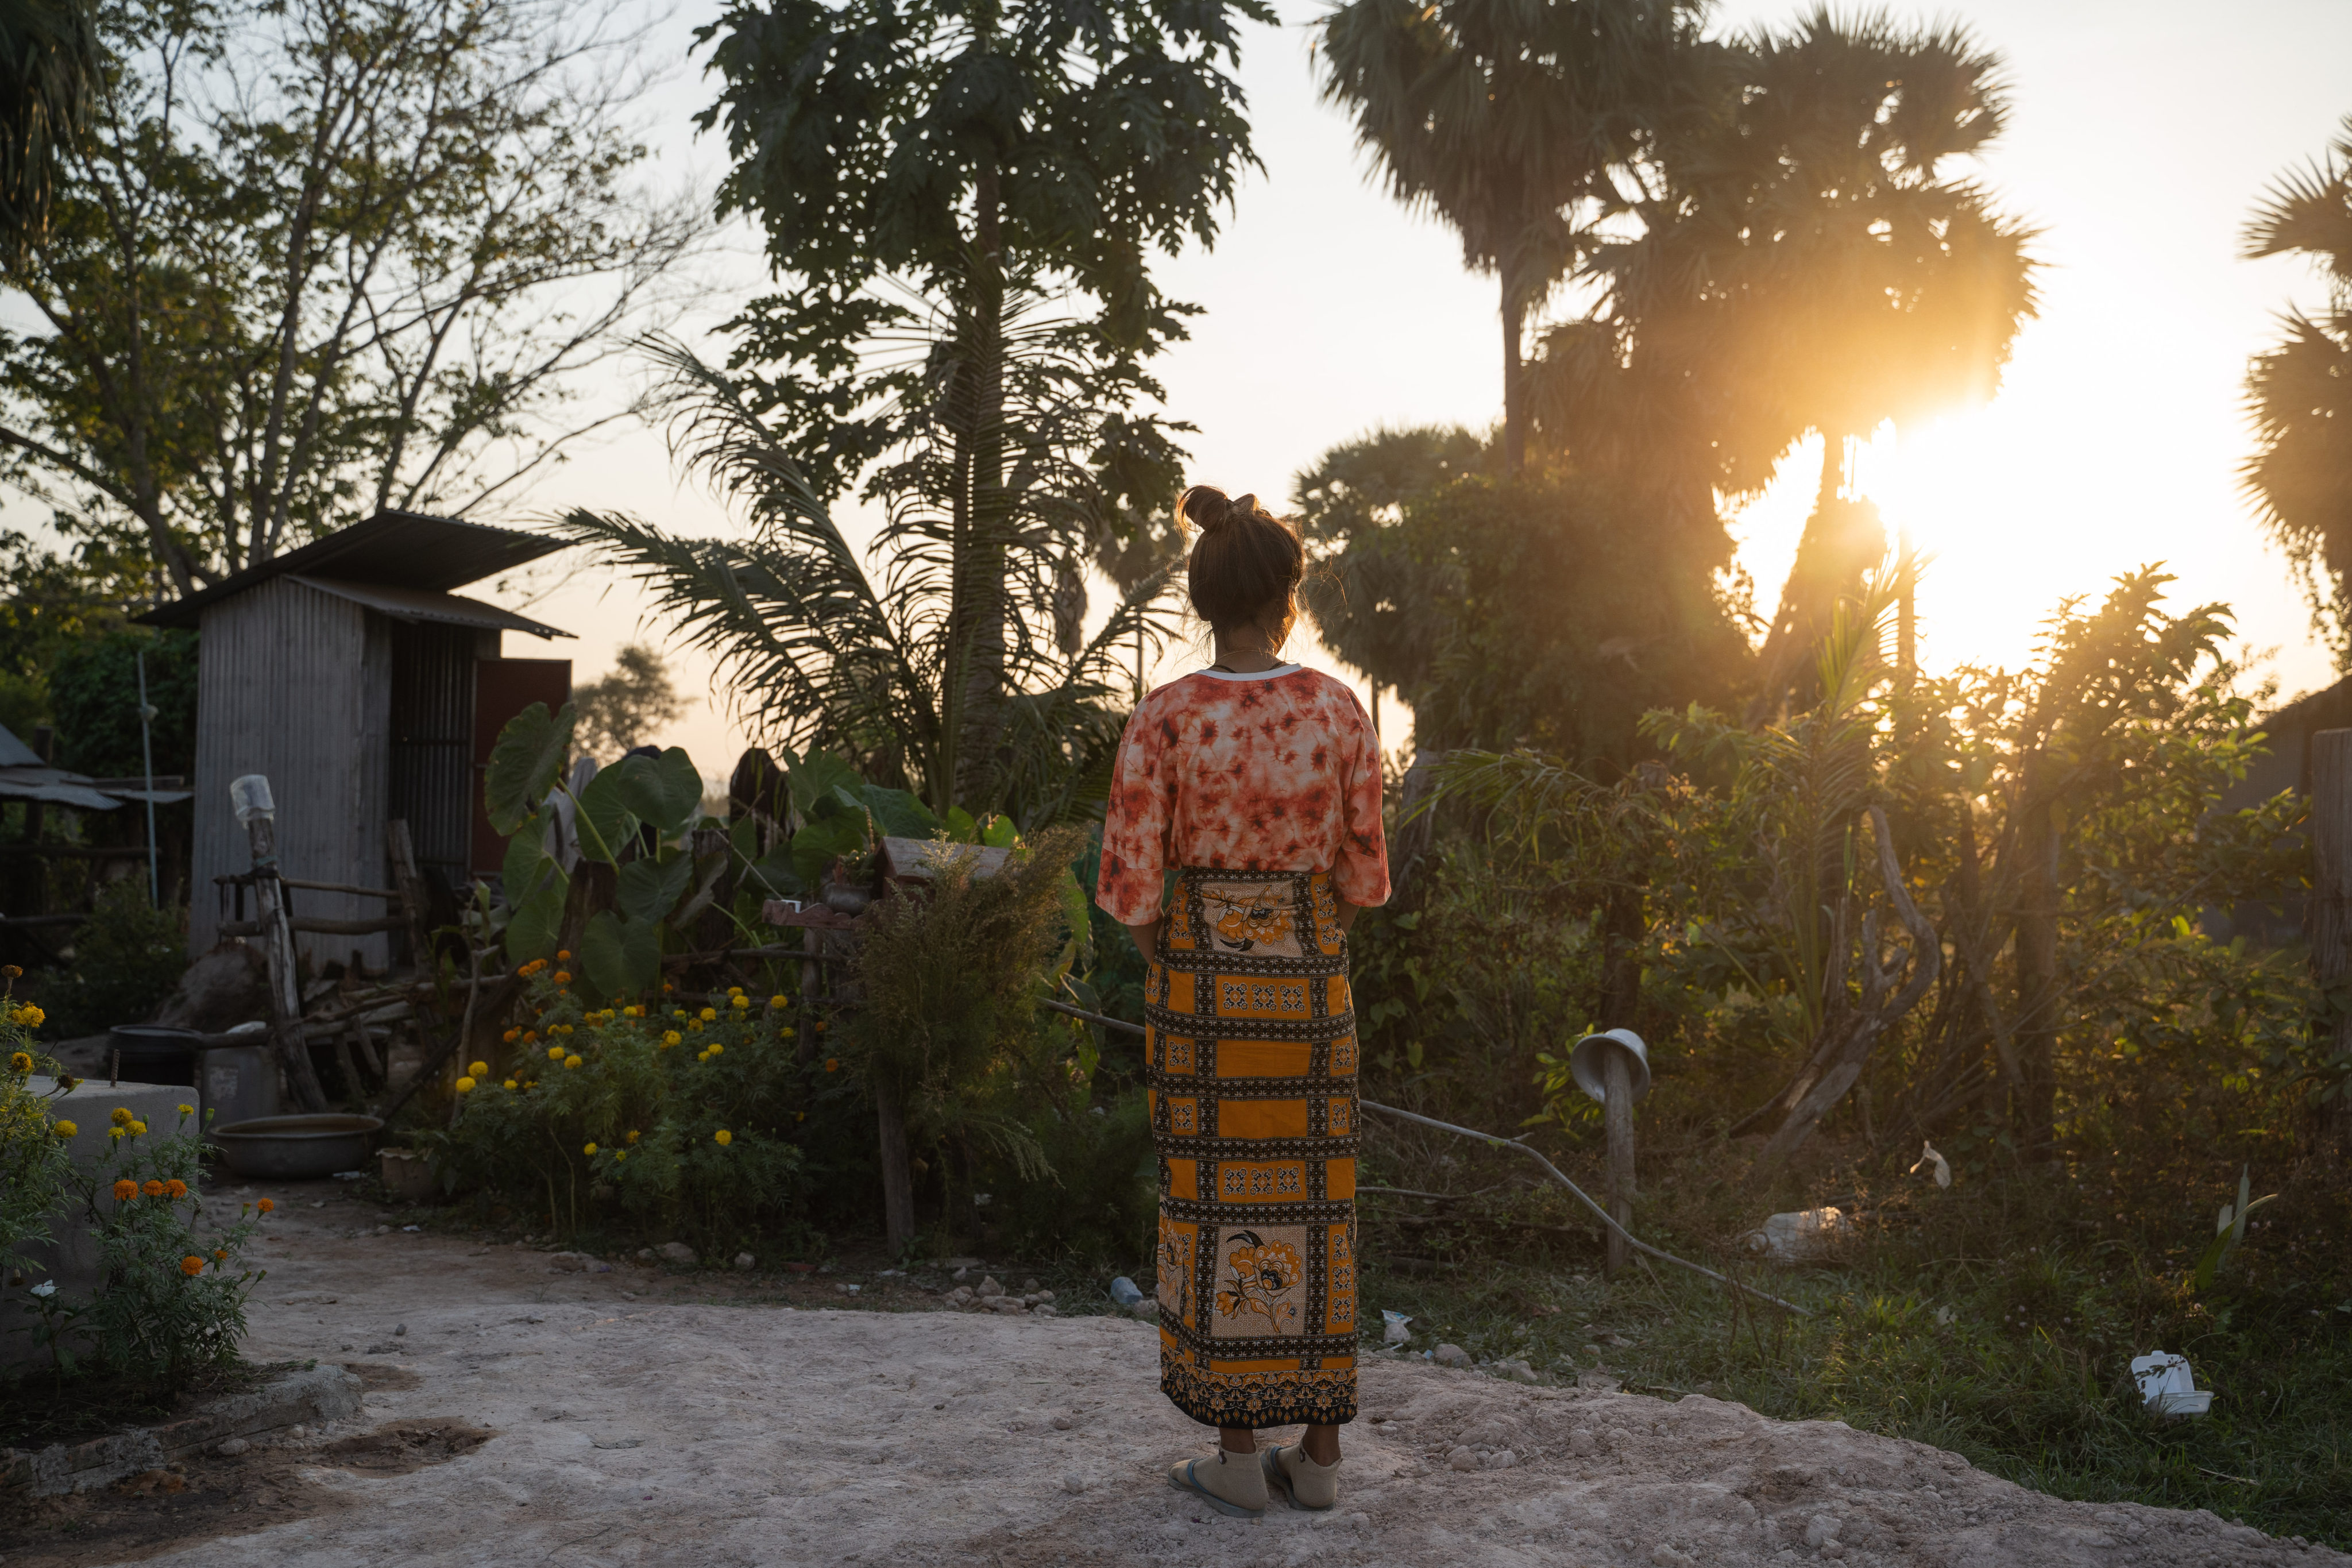 Kunthea is one of hundreds of Cambodian women and girls duped and trafficked to China each year, where they are forced to marry local men. Photo: Cindy Liu